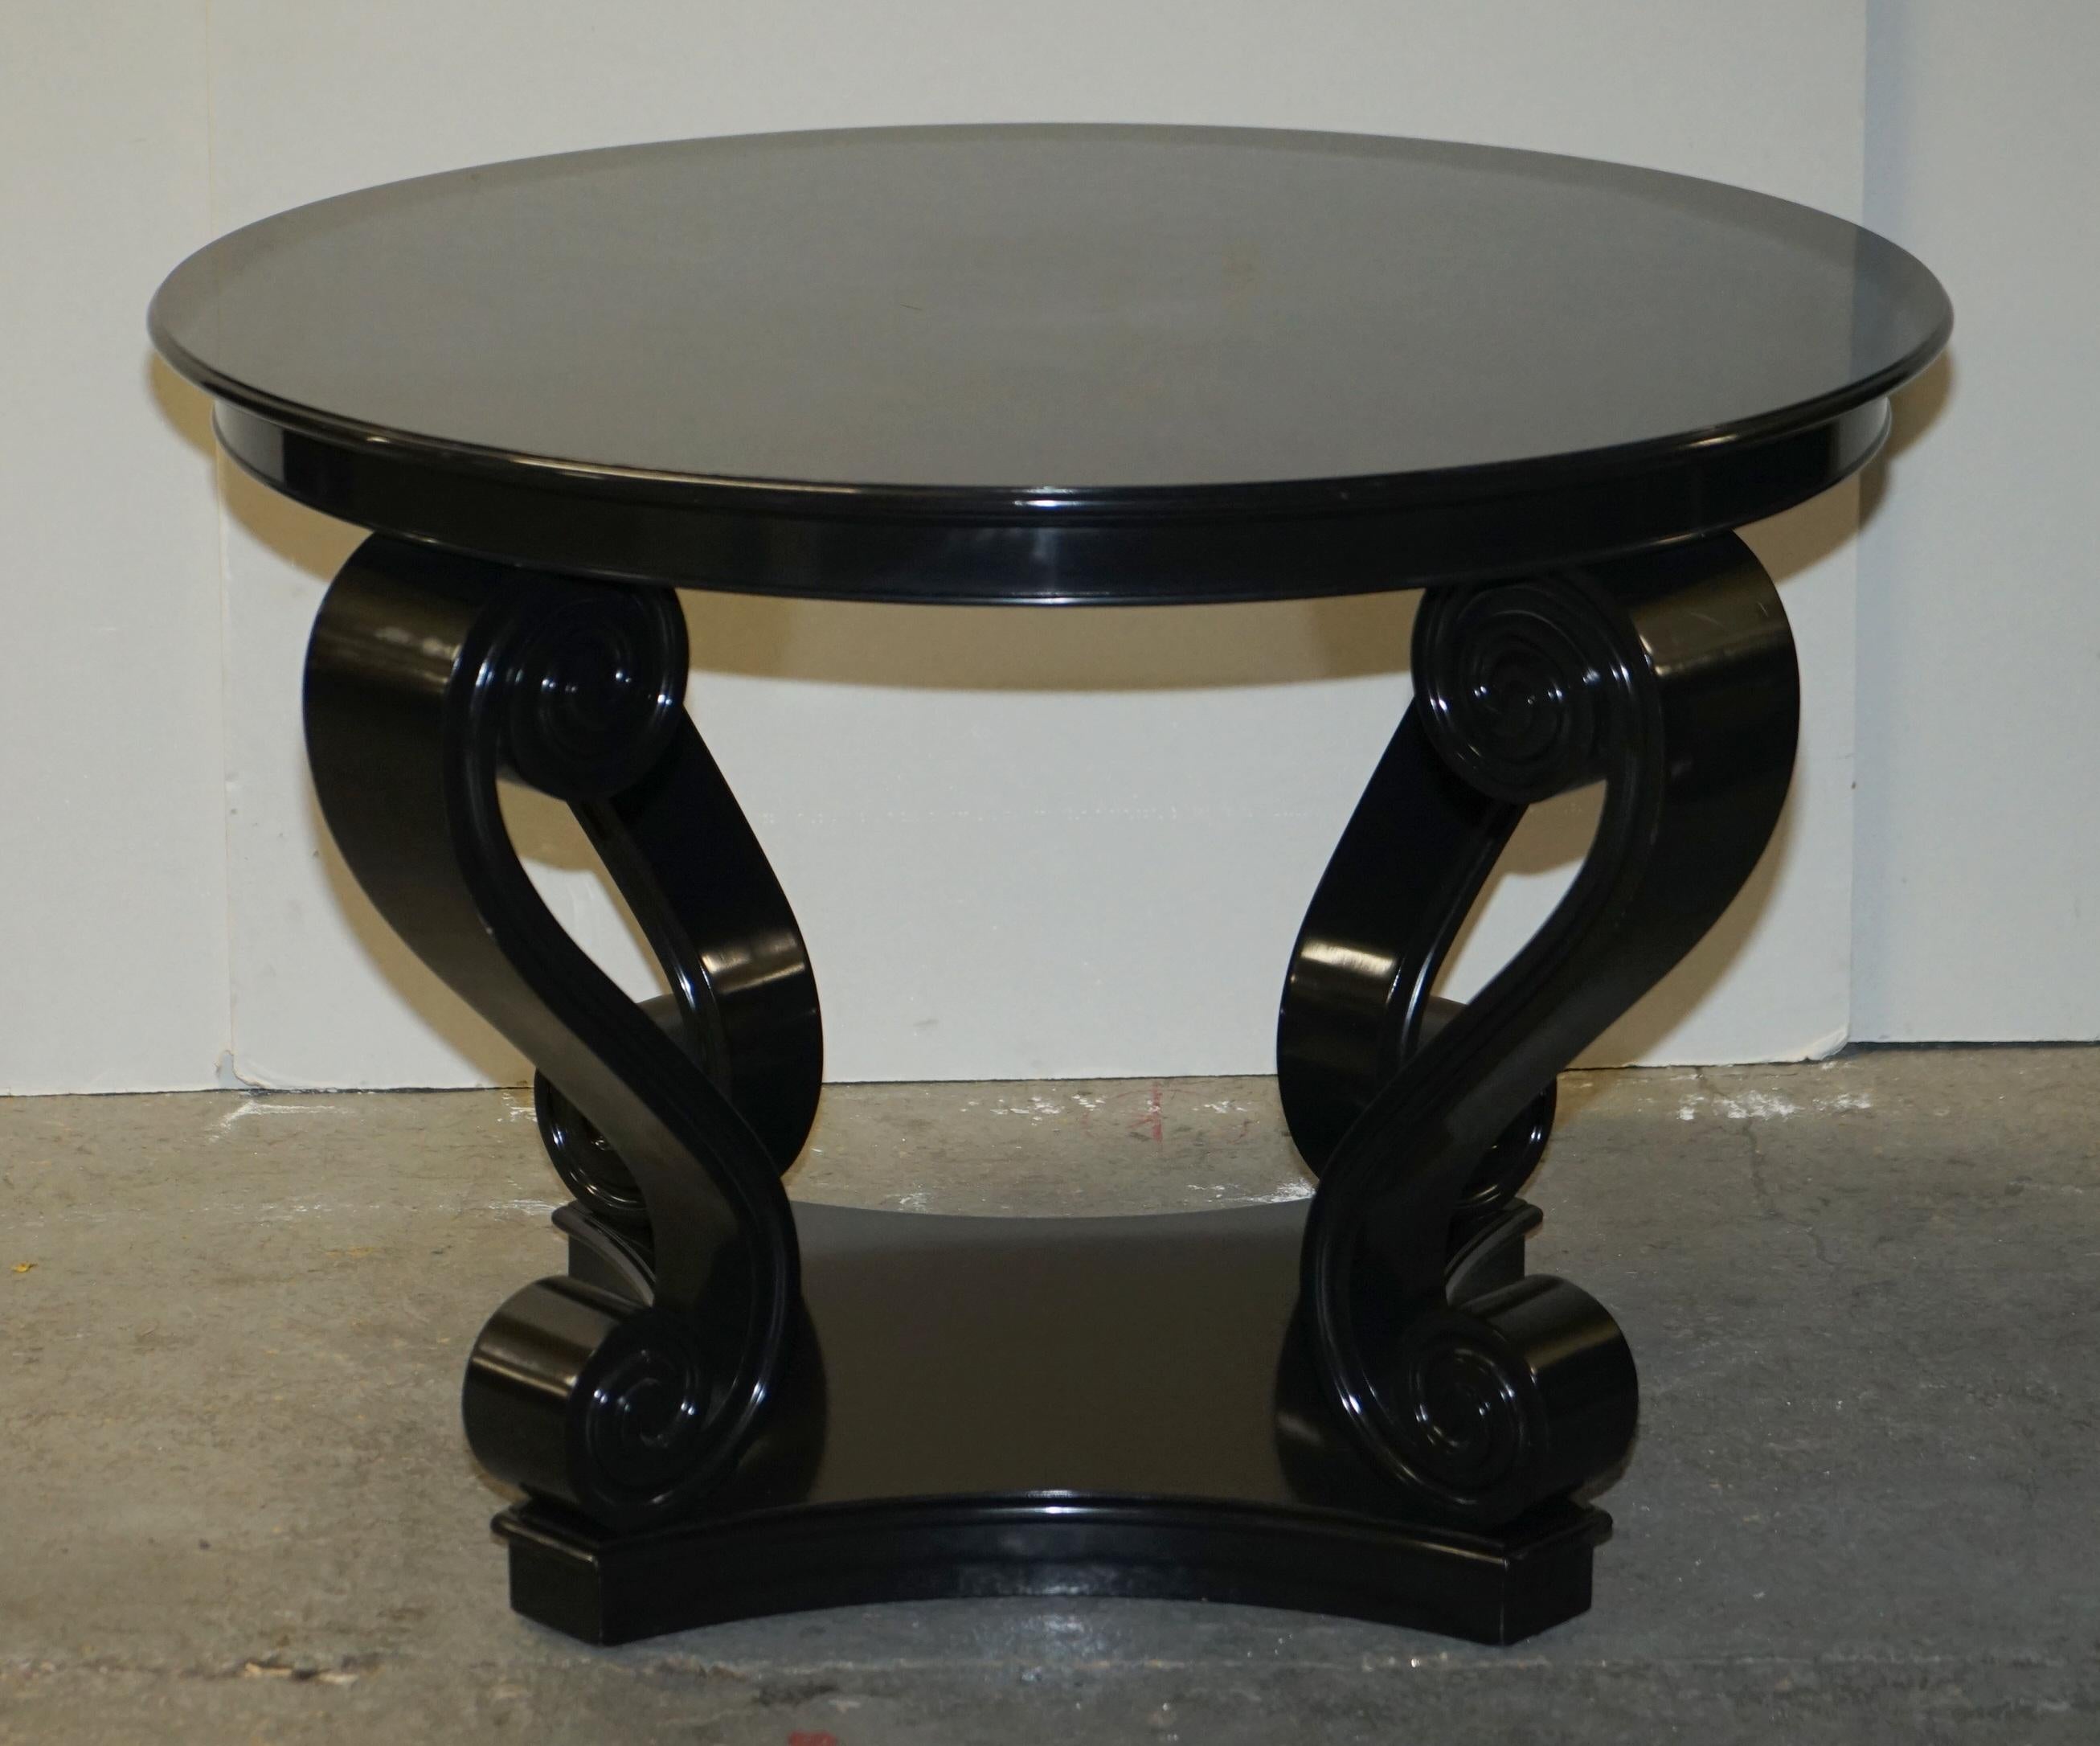 We are delighted to offer for sale this exquisite pair of RRP £15,310 Ralph Lauren One fifth hall tables 

I have around 40 pieces of new Ralph Lauren furniture now in stock, most of which is from the Brook Street range, there are Crocodile